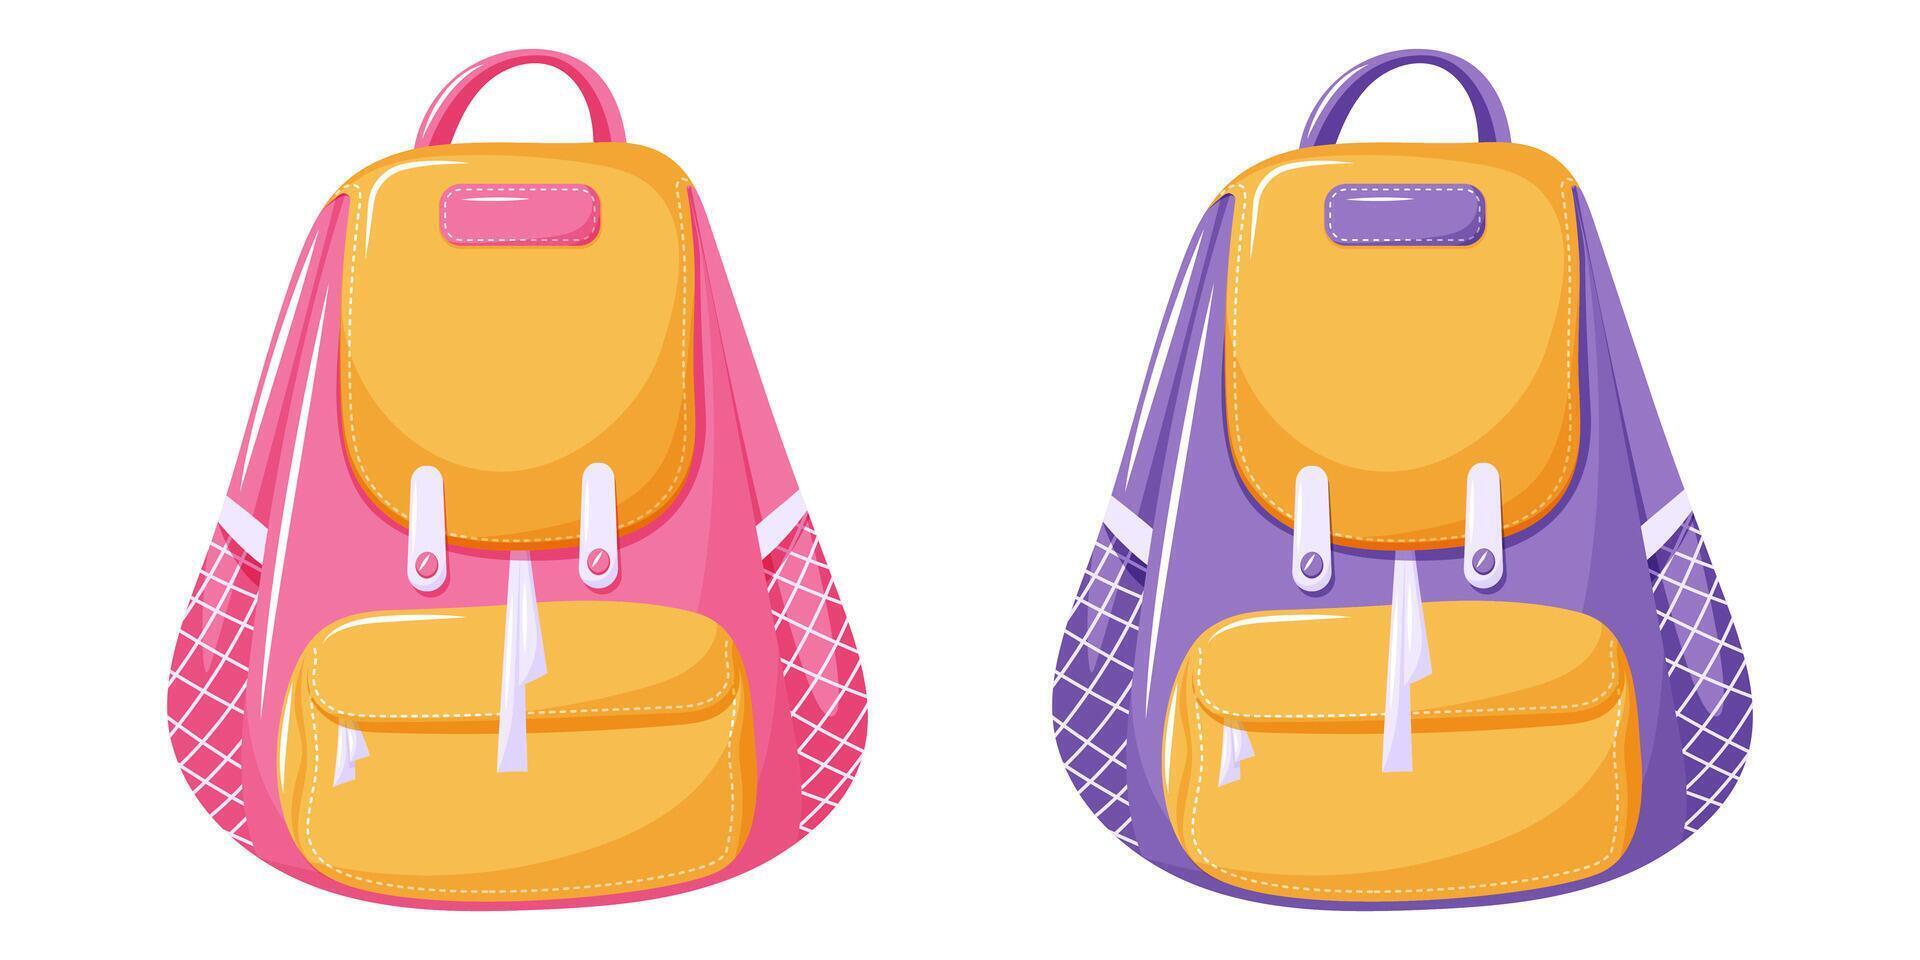 School childish backpack for girl and boy, pink and purple color. Children briefcases, schhoolbags for supplies. Back to school, education concept, illustration, modern cartoon flat style vector